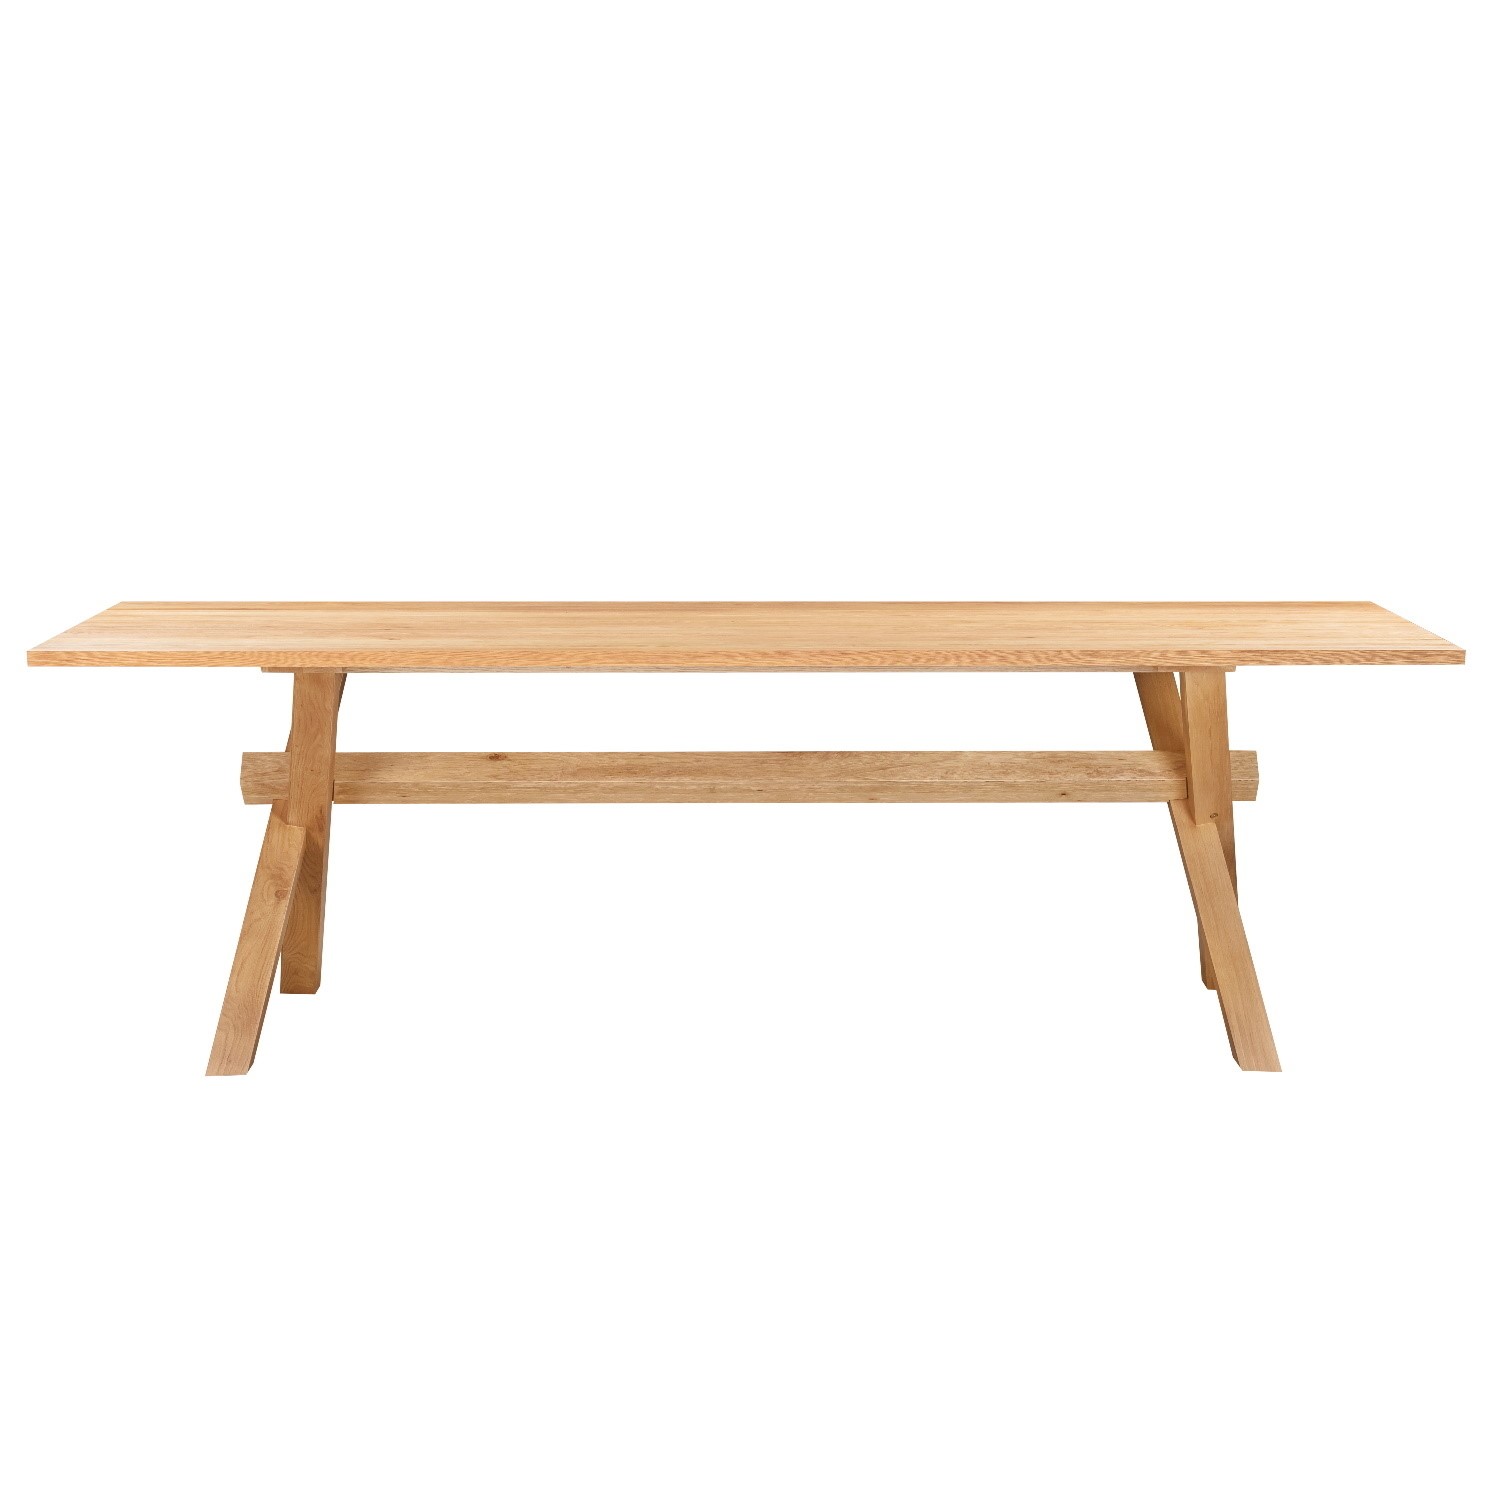 Large Oak Refectory Dining Table - Seats 10 - Anders - Furniture123